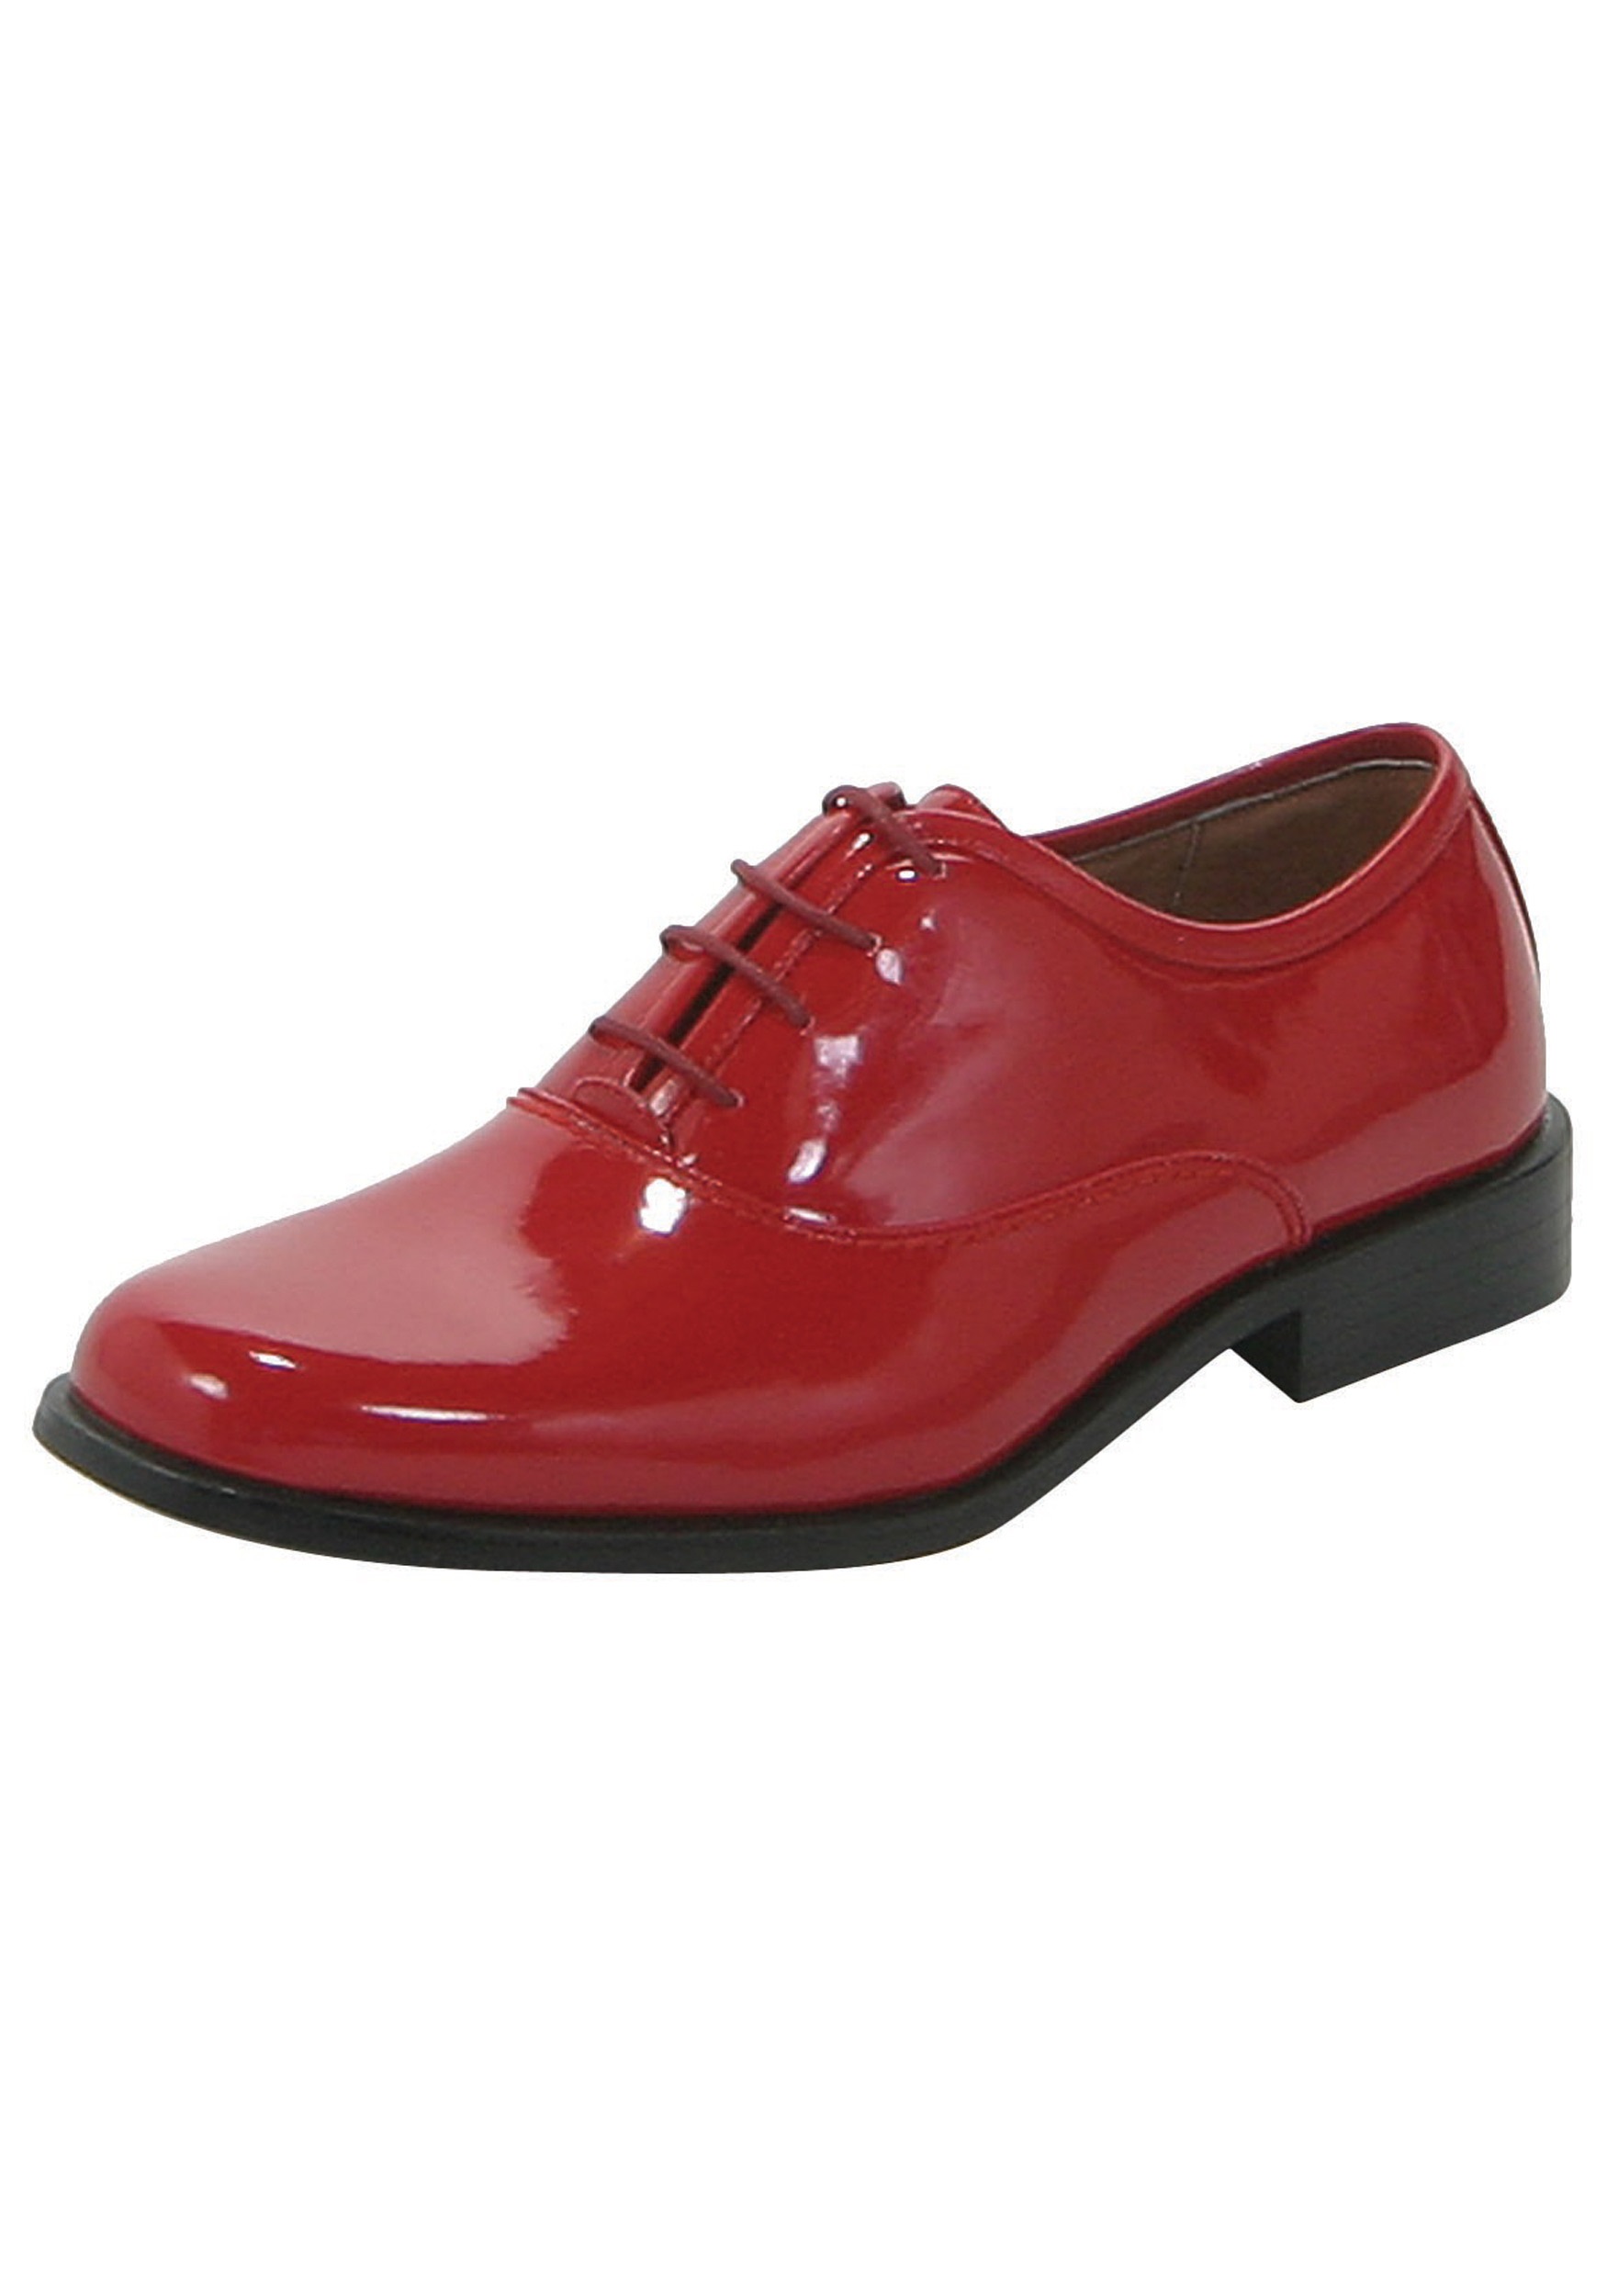 How to wear red shoes in a men's styling?